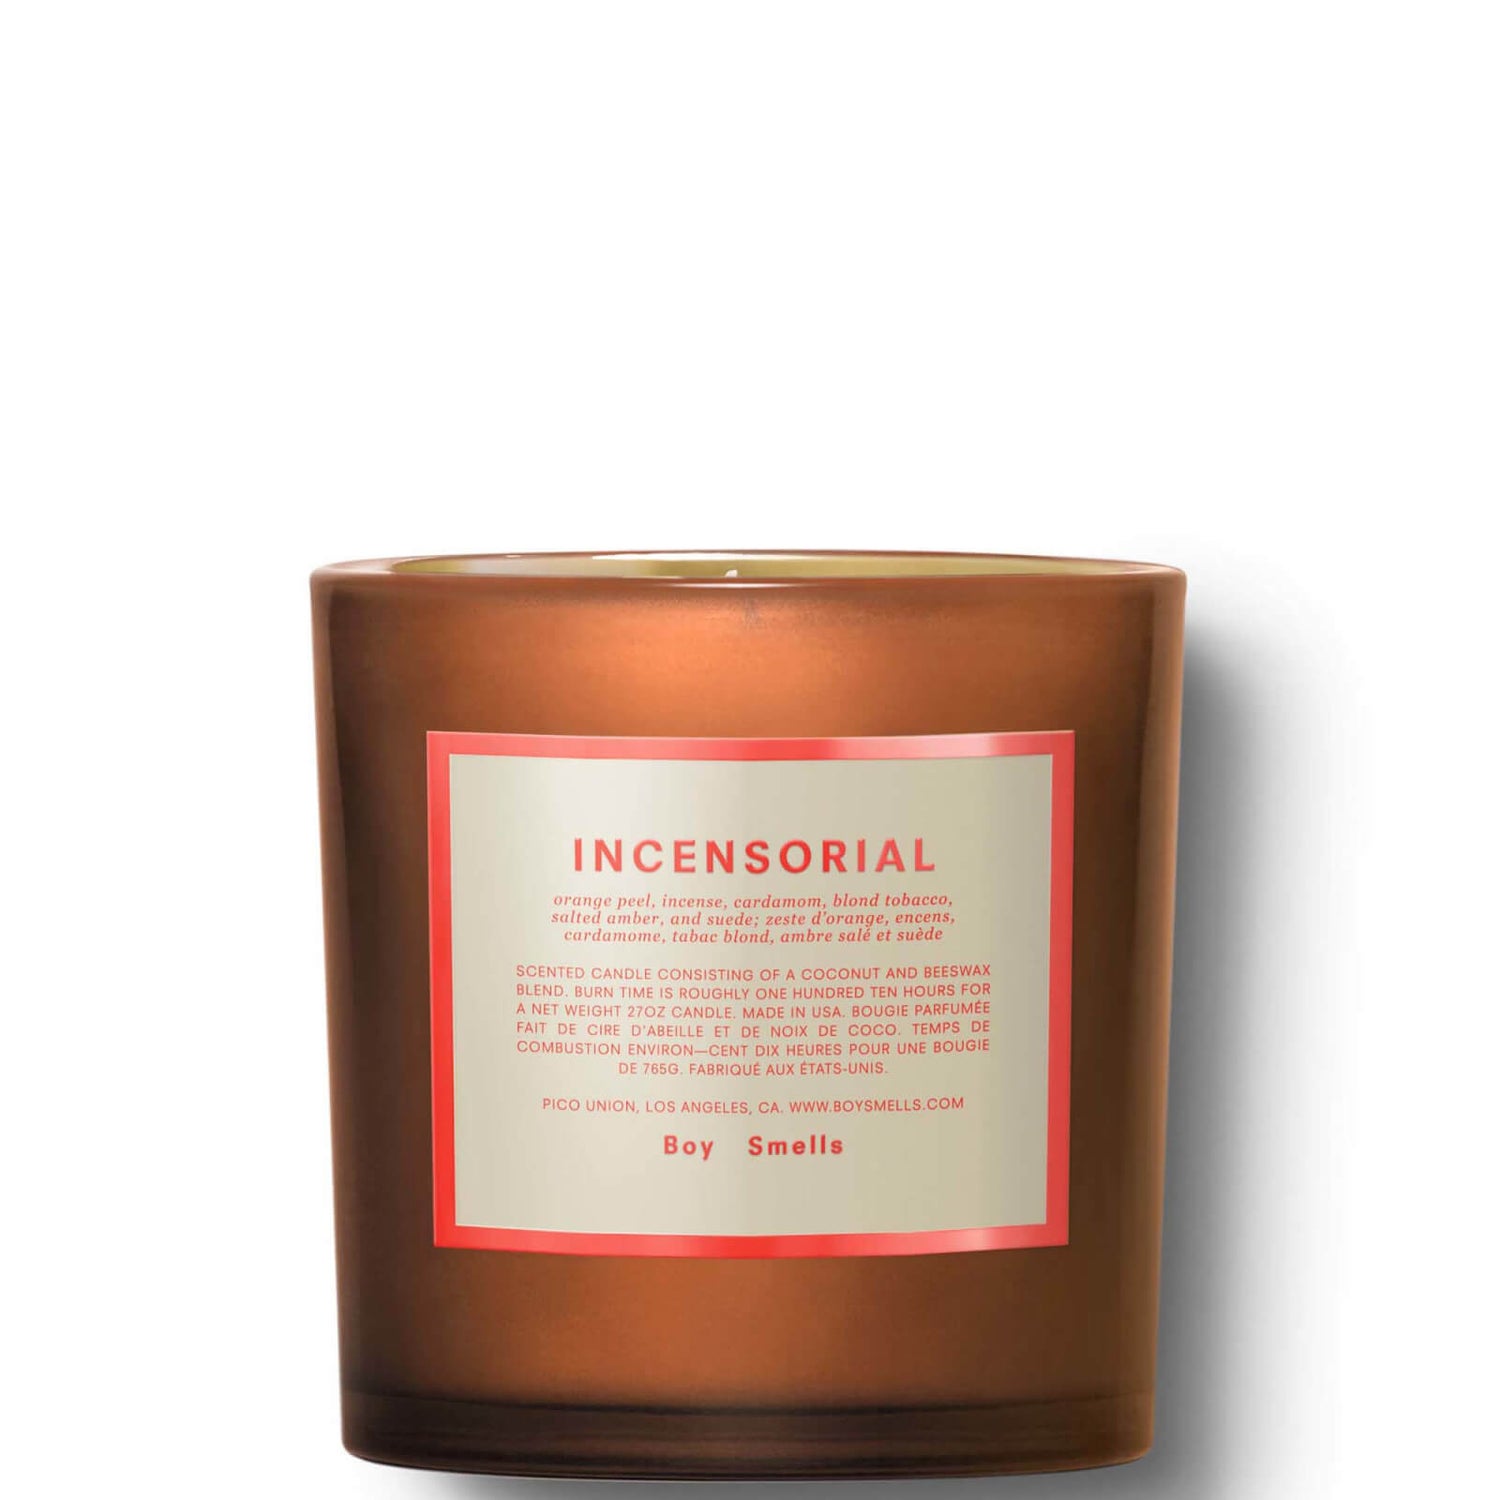 boy smells holiday incensorial candle 8.5 oz